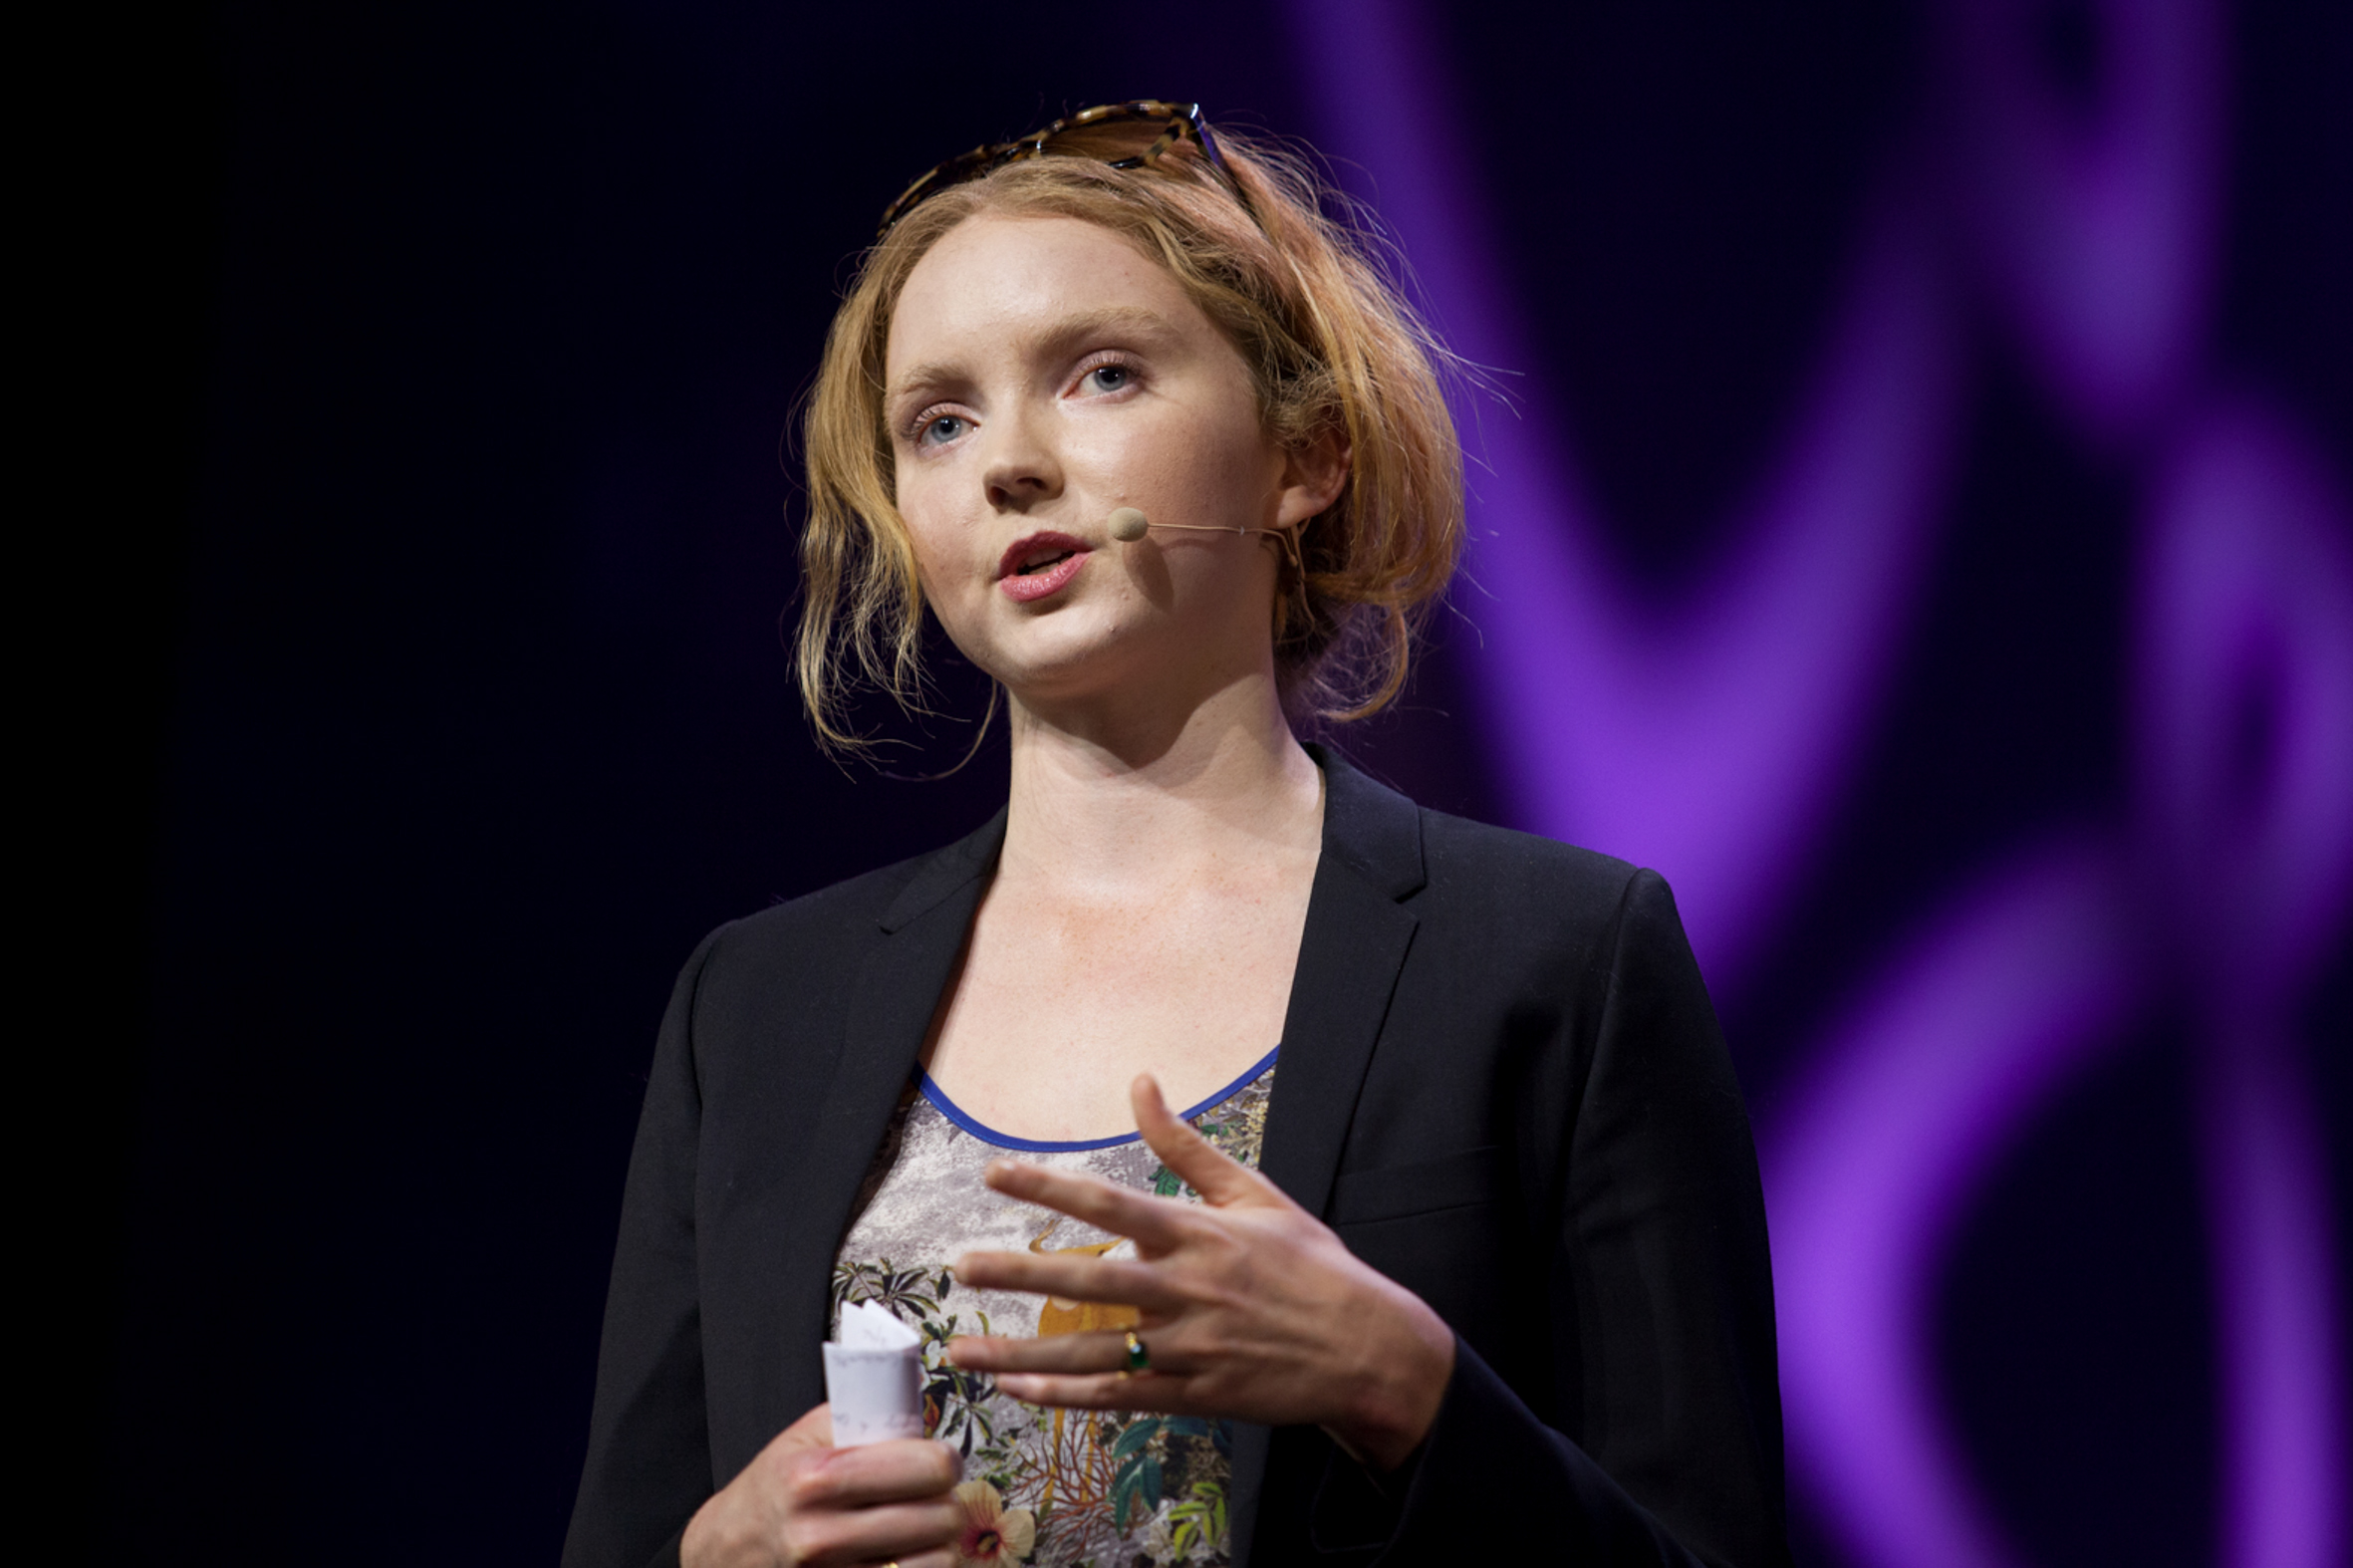 Lily Cole speaks at LeWeb conference